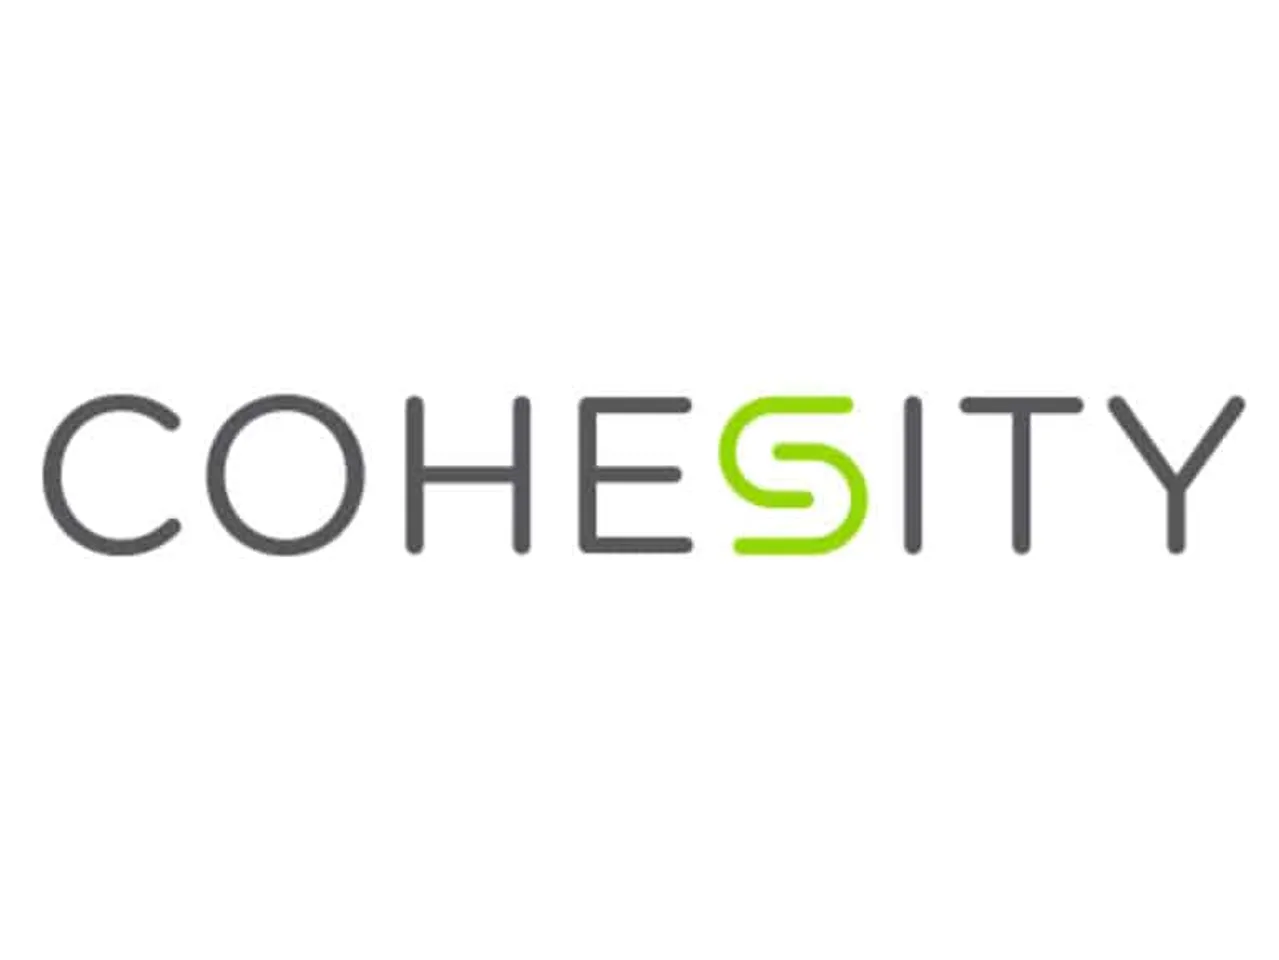 Cohesity launches India operations- appoints Apurv Gupta as head of Cohesity India